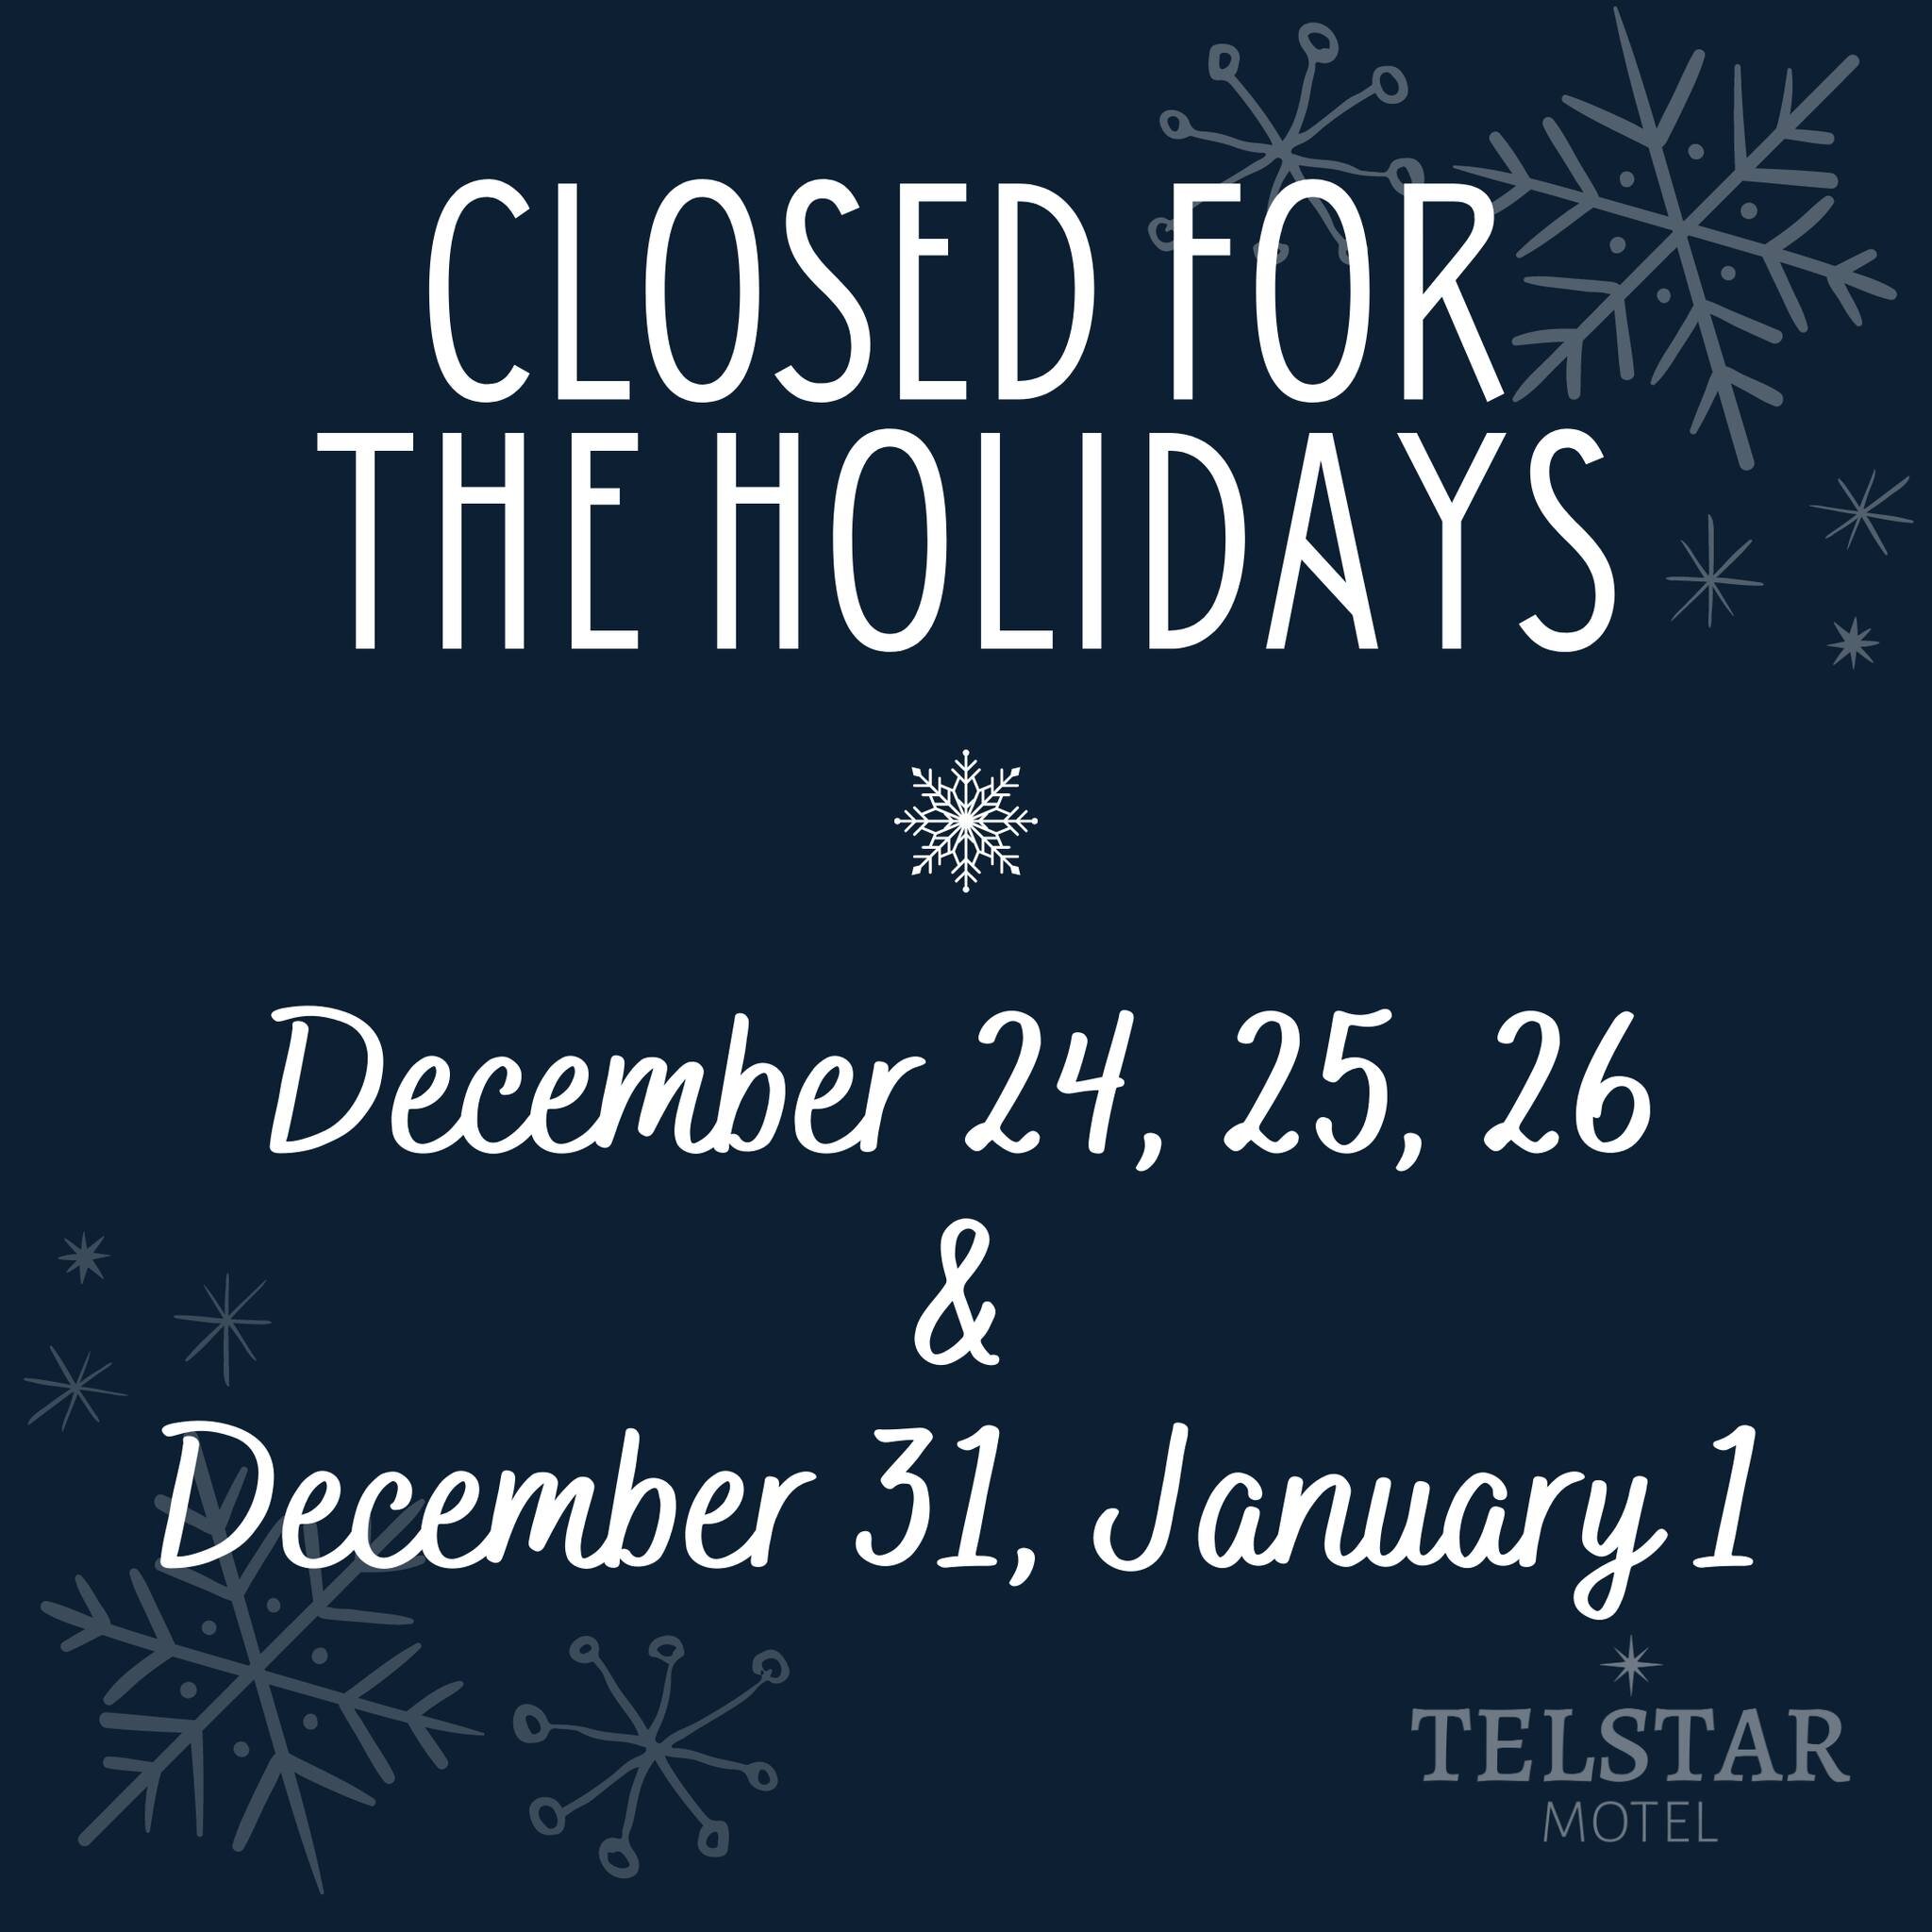 Annual courtesy post to remind you we'll be closed for the holidays ~❄️

Our staff have worked exceptionally hard carrying us through our busiest summer yet, so we've more than earned some time to ourselves this year!

Wishing a happy holiday season 